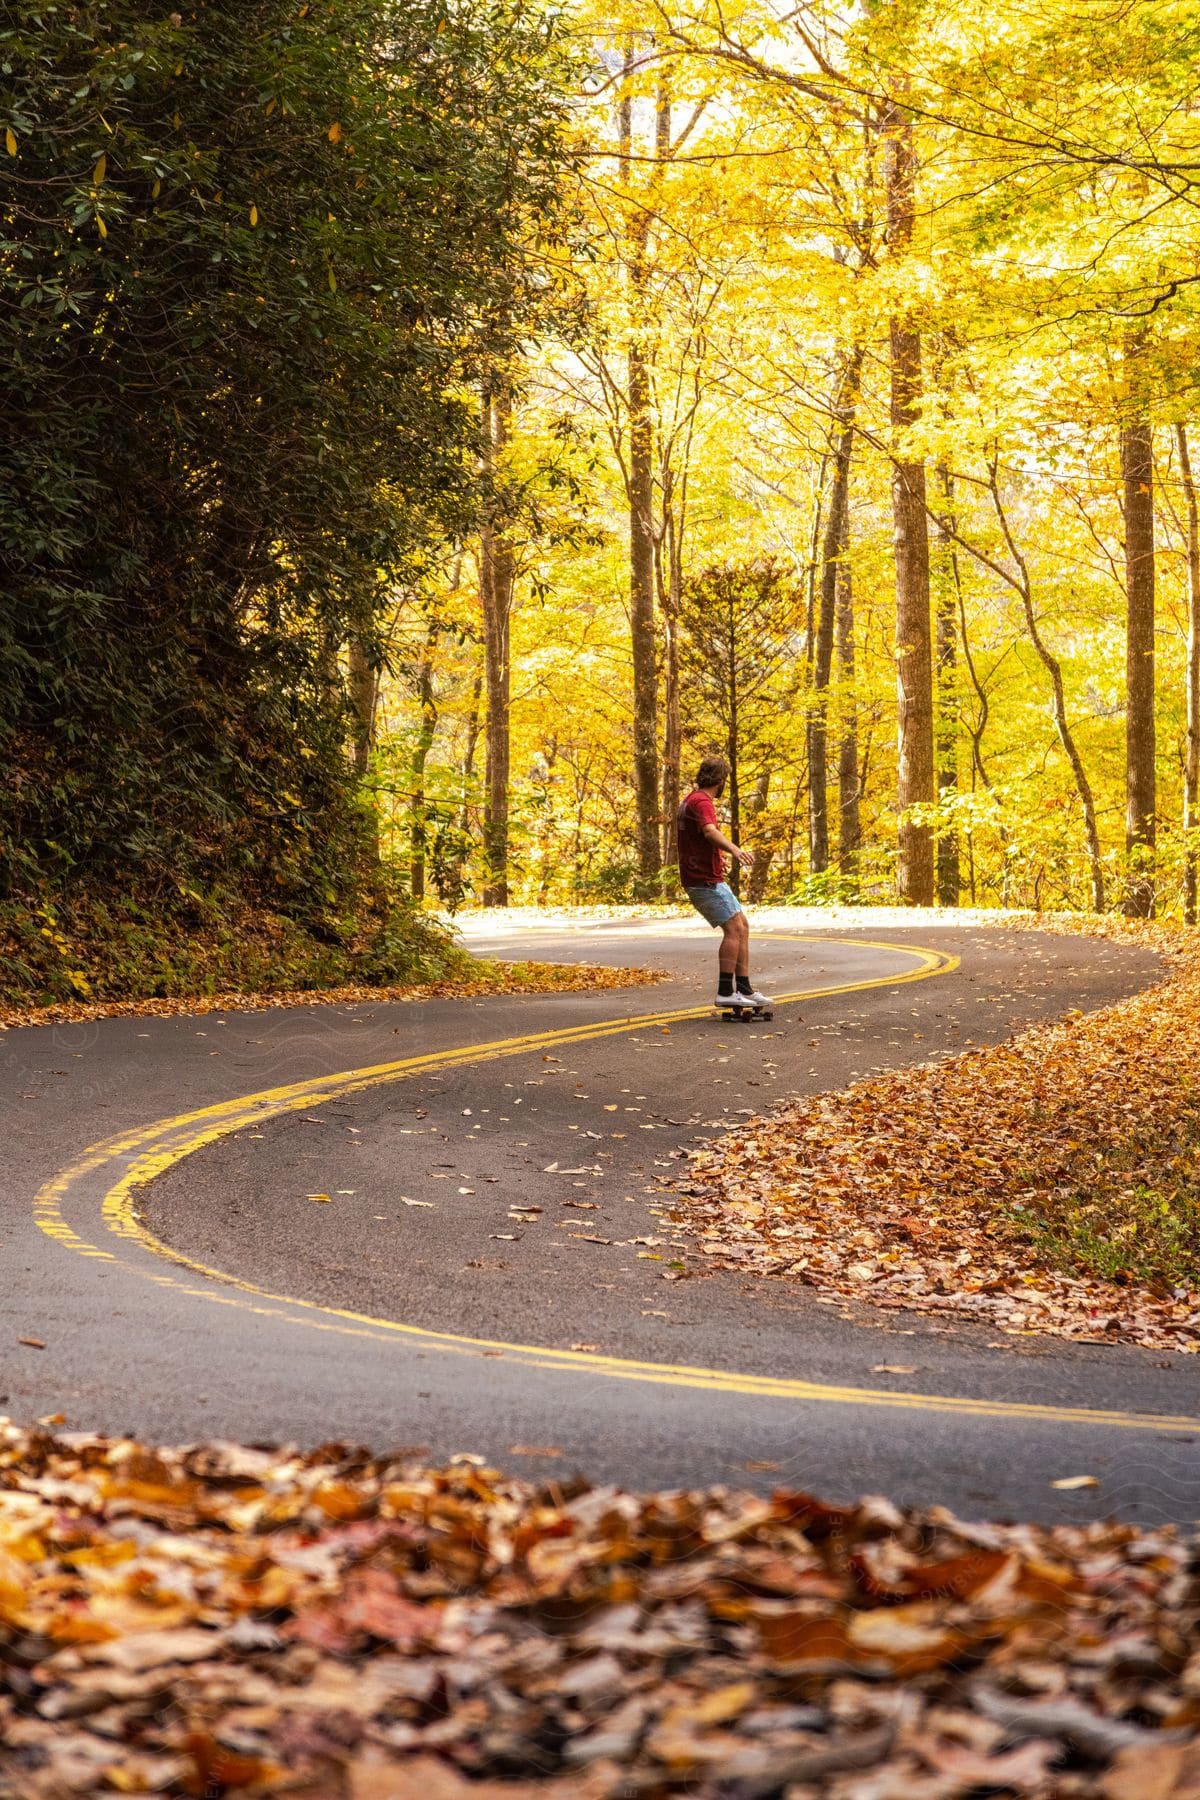 A man riding a skateboard on an asphalt street with a yellow line in the middle and many trees and fallen leaves around him